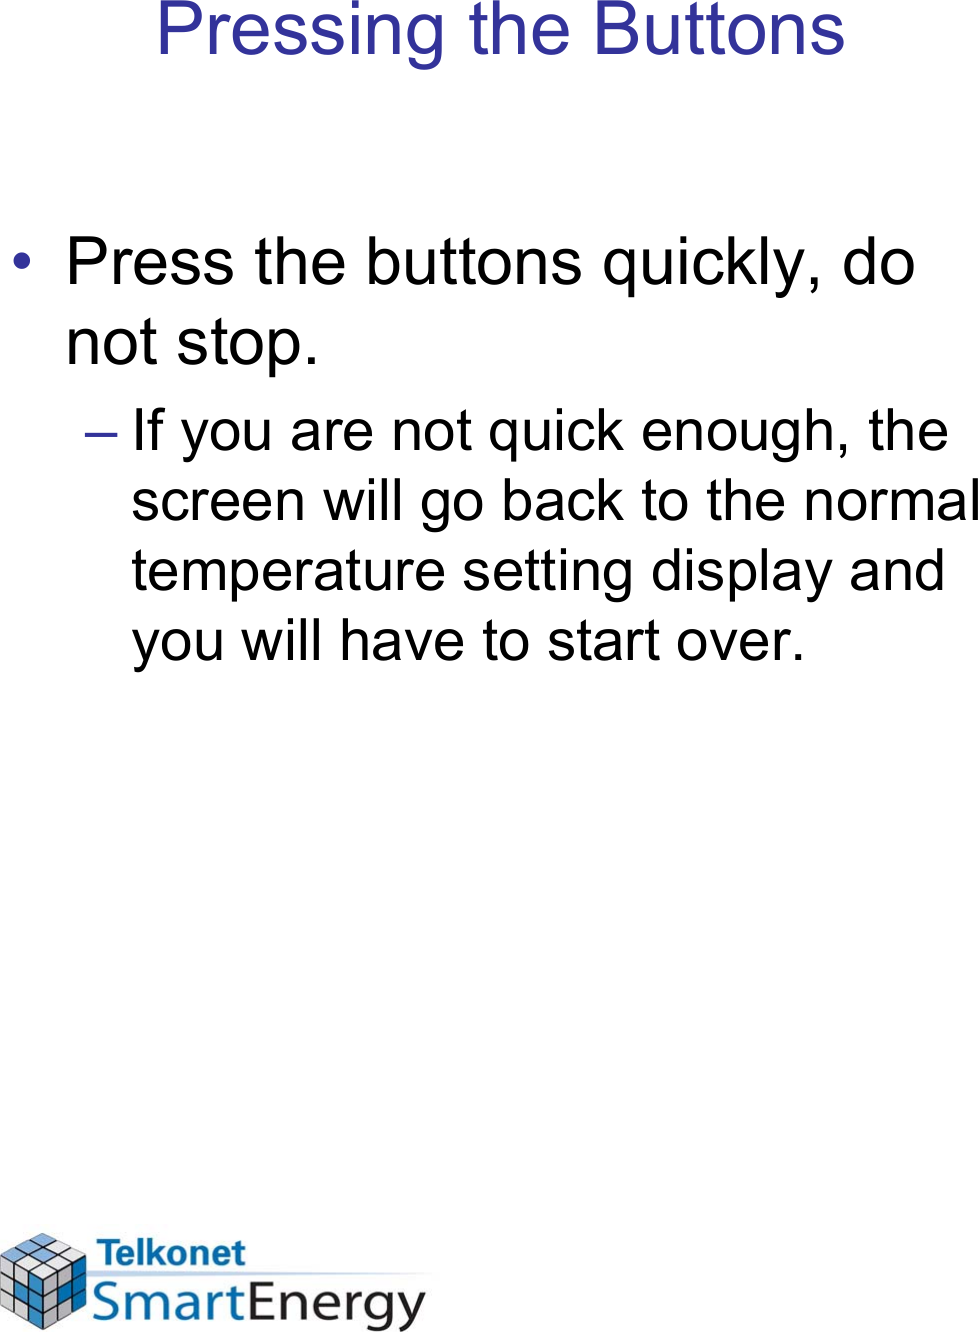 Pressing the Buttons• Press the buttons quickly, do not stop.– If you are not quick enough, the screen will go back to the normal temperature setting display and you will have to start over.